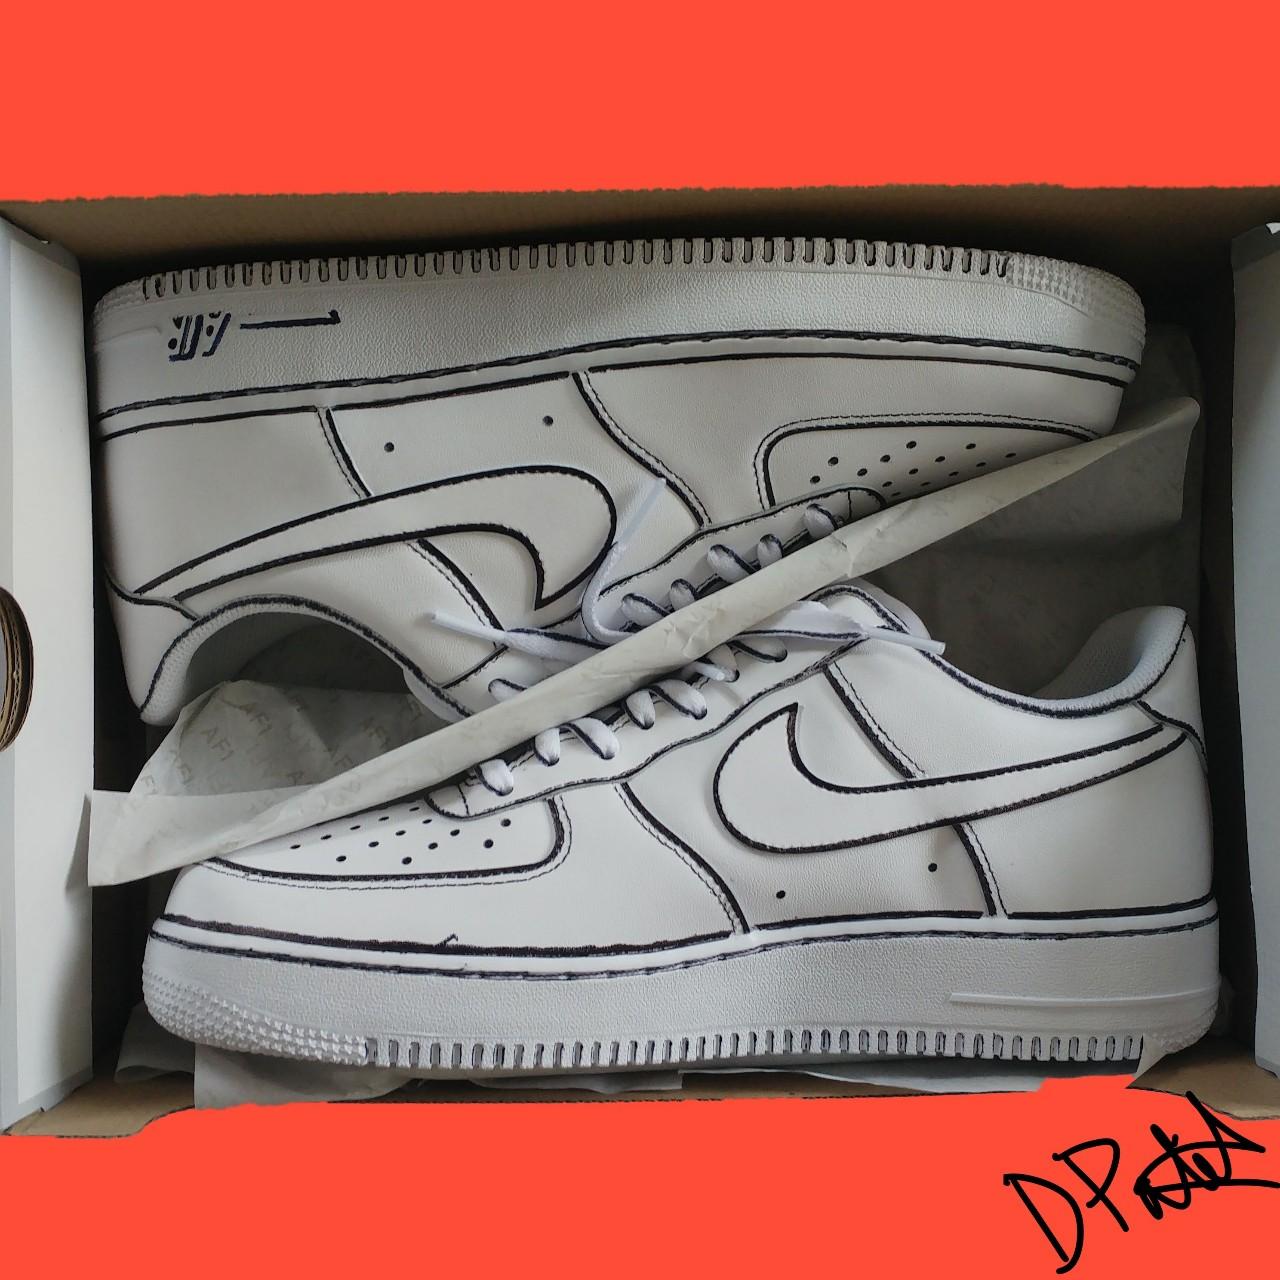 sharpie on air force 1